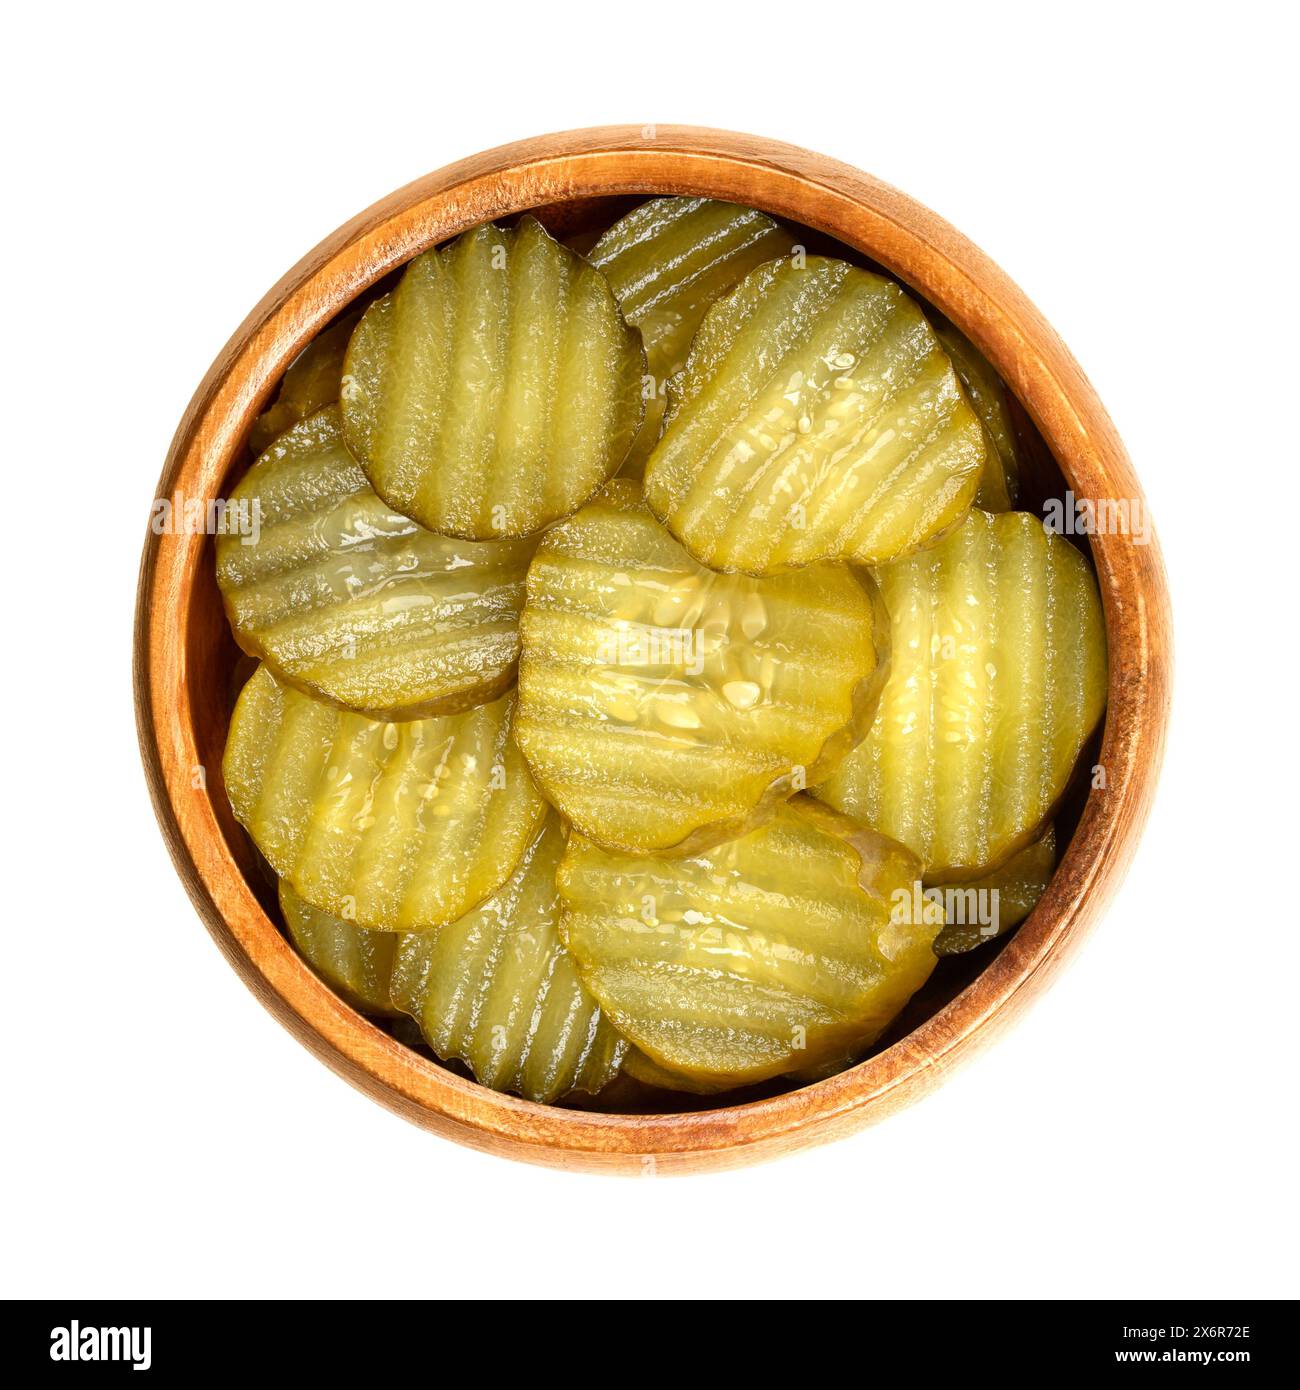 Burger gherkin slices, in a wooden bowl. Pickled cucumbers, cut in round and wavy form, pasteurized and preserved in vinegar brine, with spices. Stock Photo